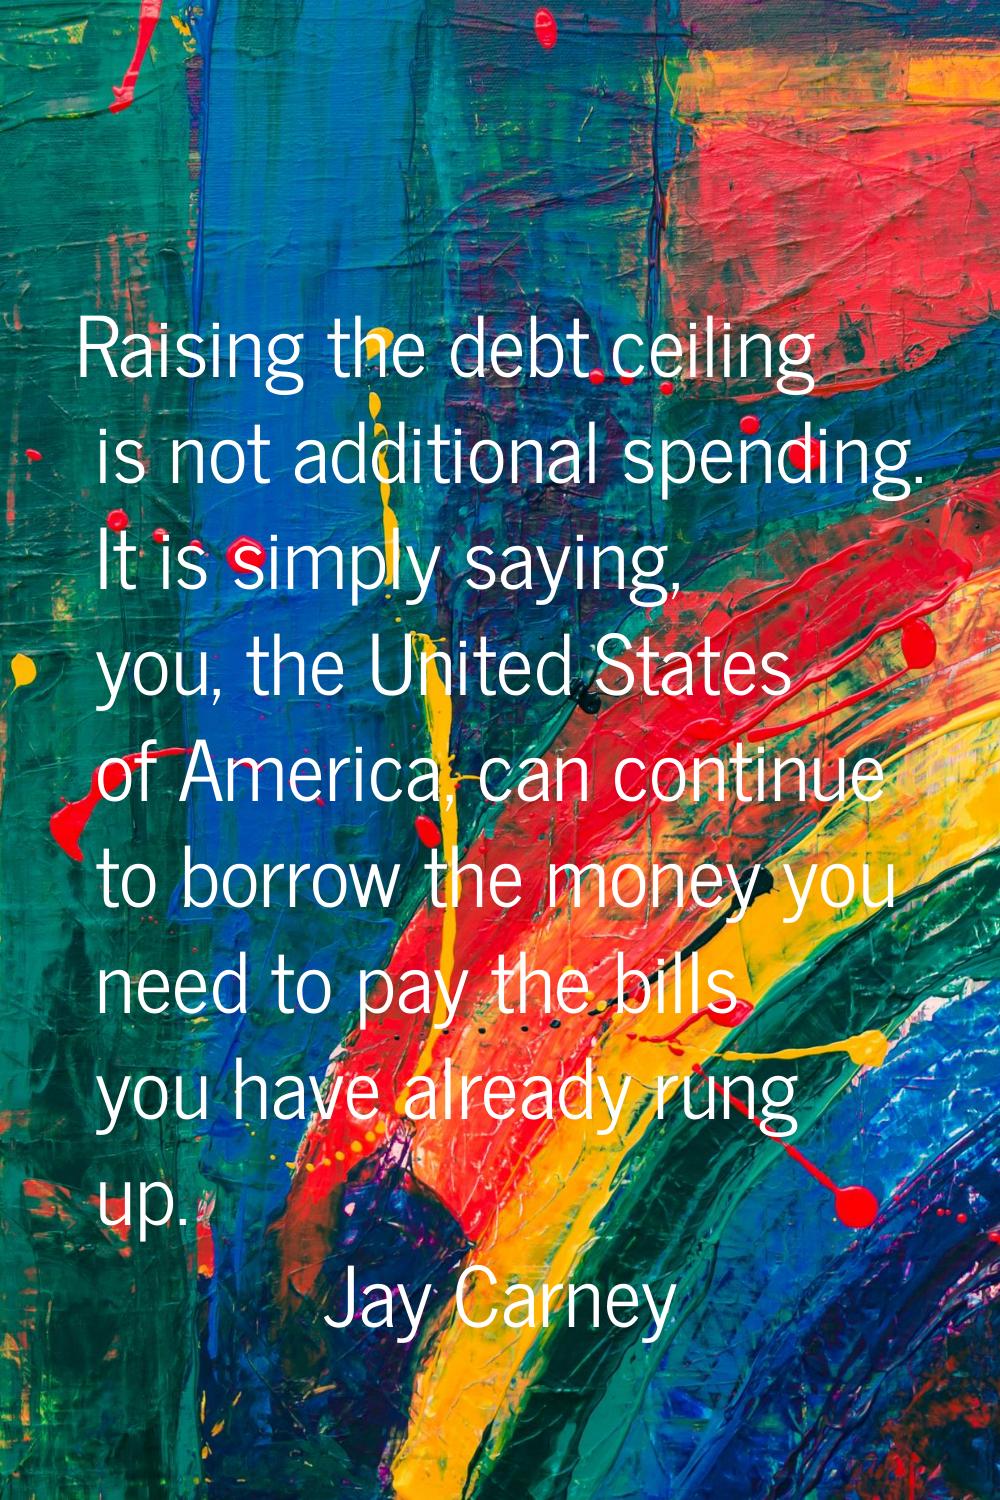 Raising the debt ceiling is not additional spending. It is simply saying, you, the United States of